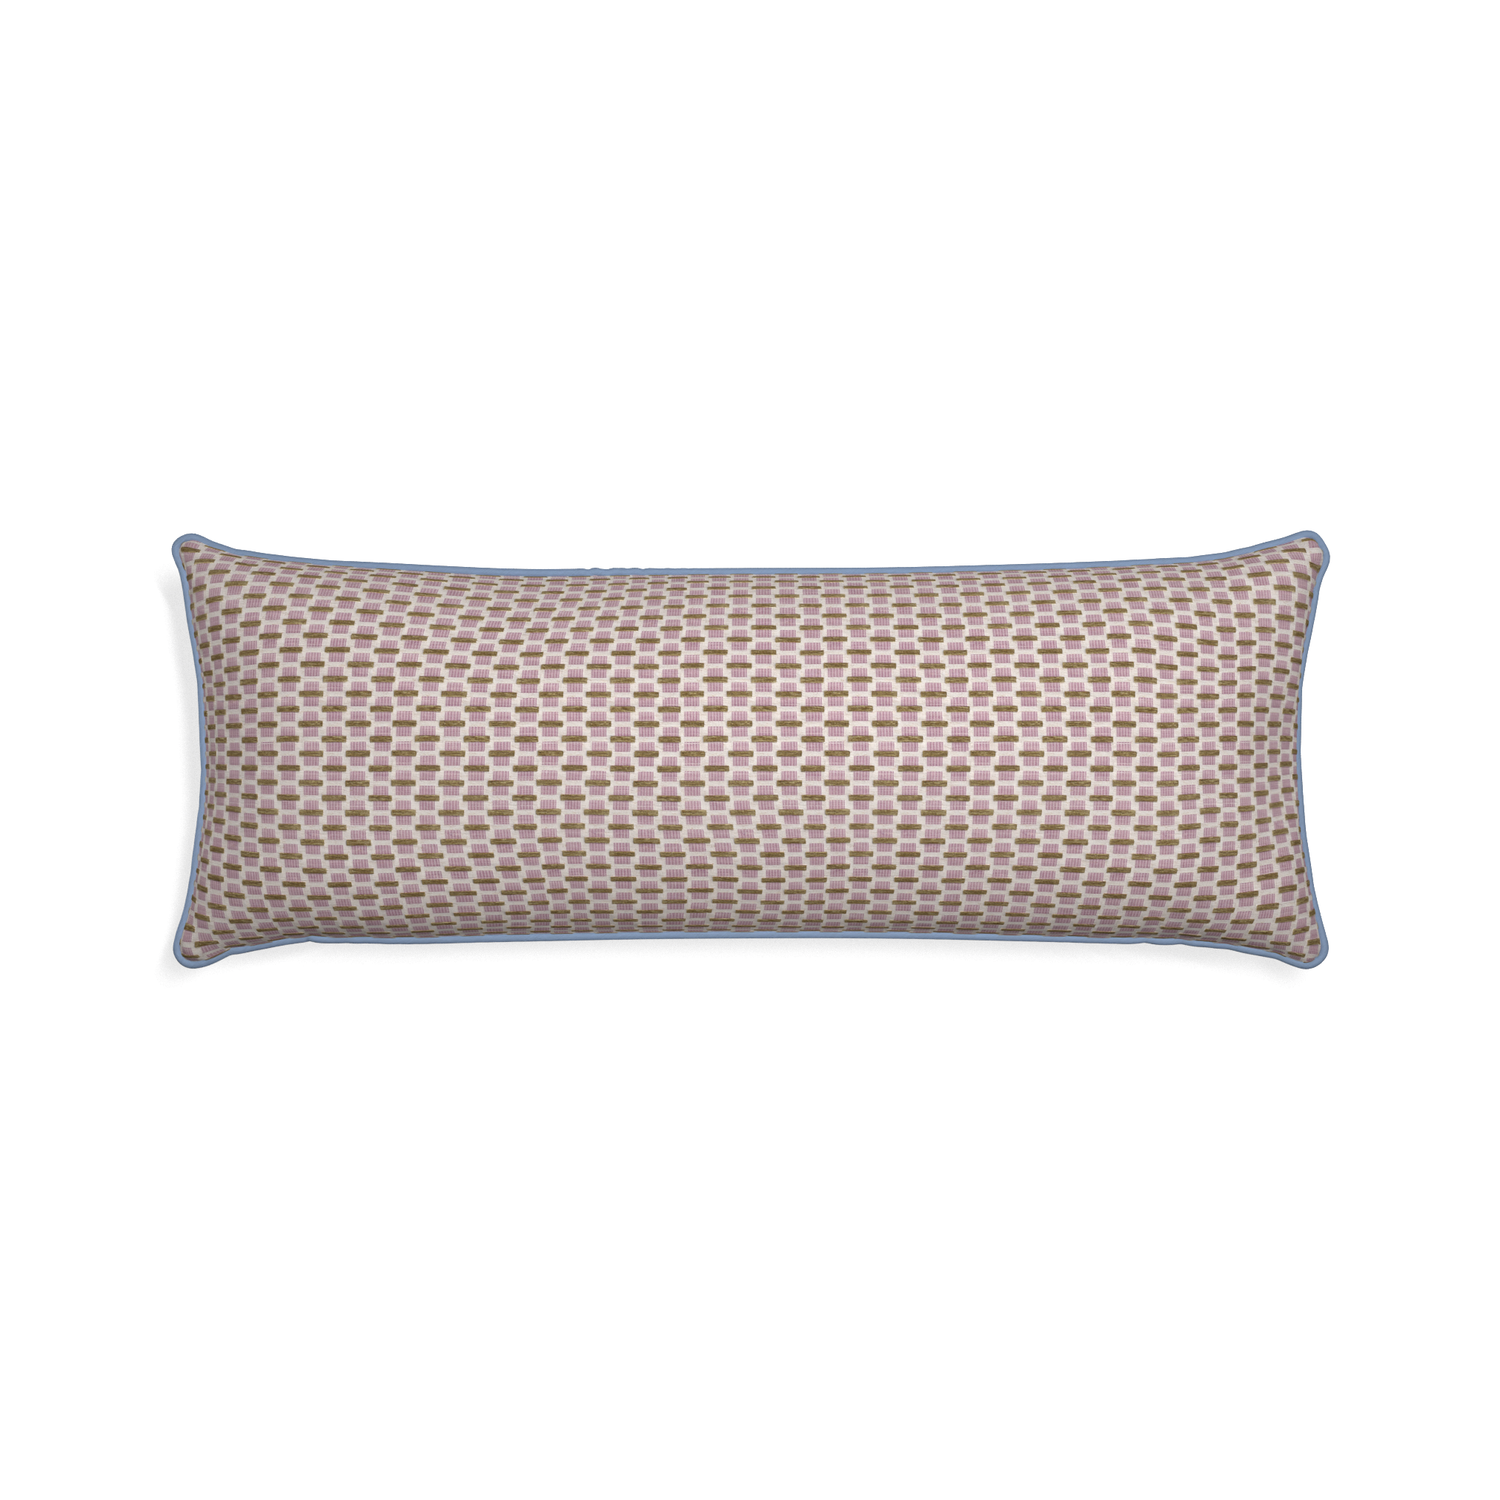 Xl-lumbar willow orchid custom pink geometric chenillepillow with sky piping on white background